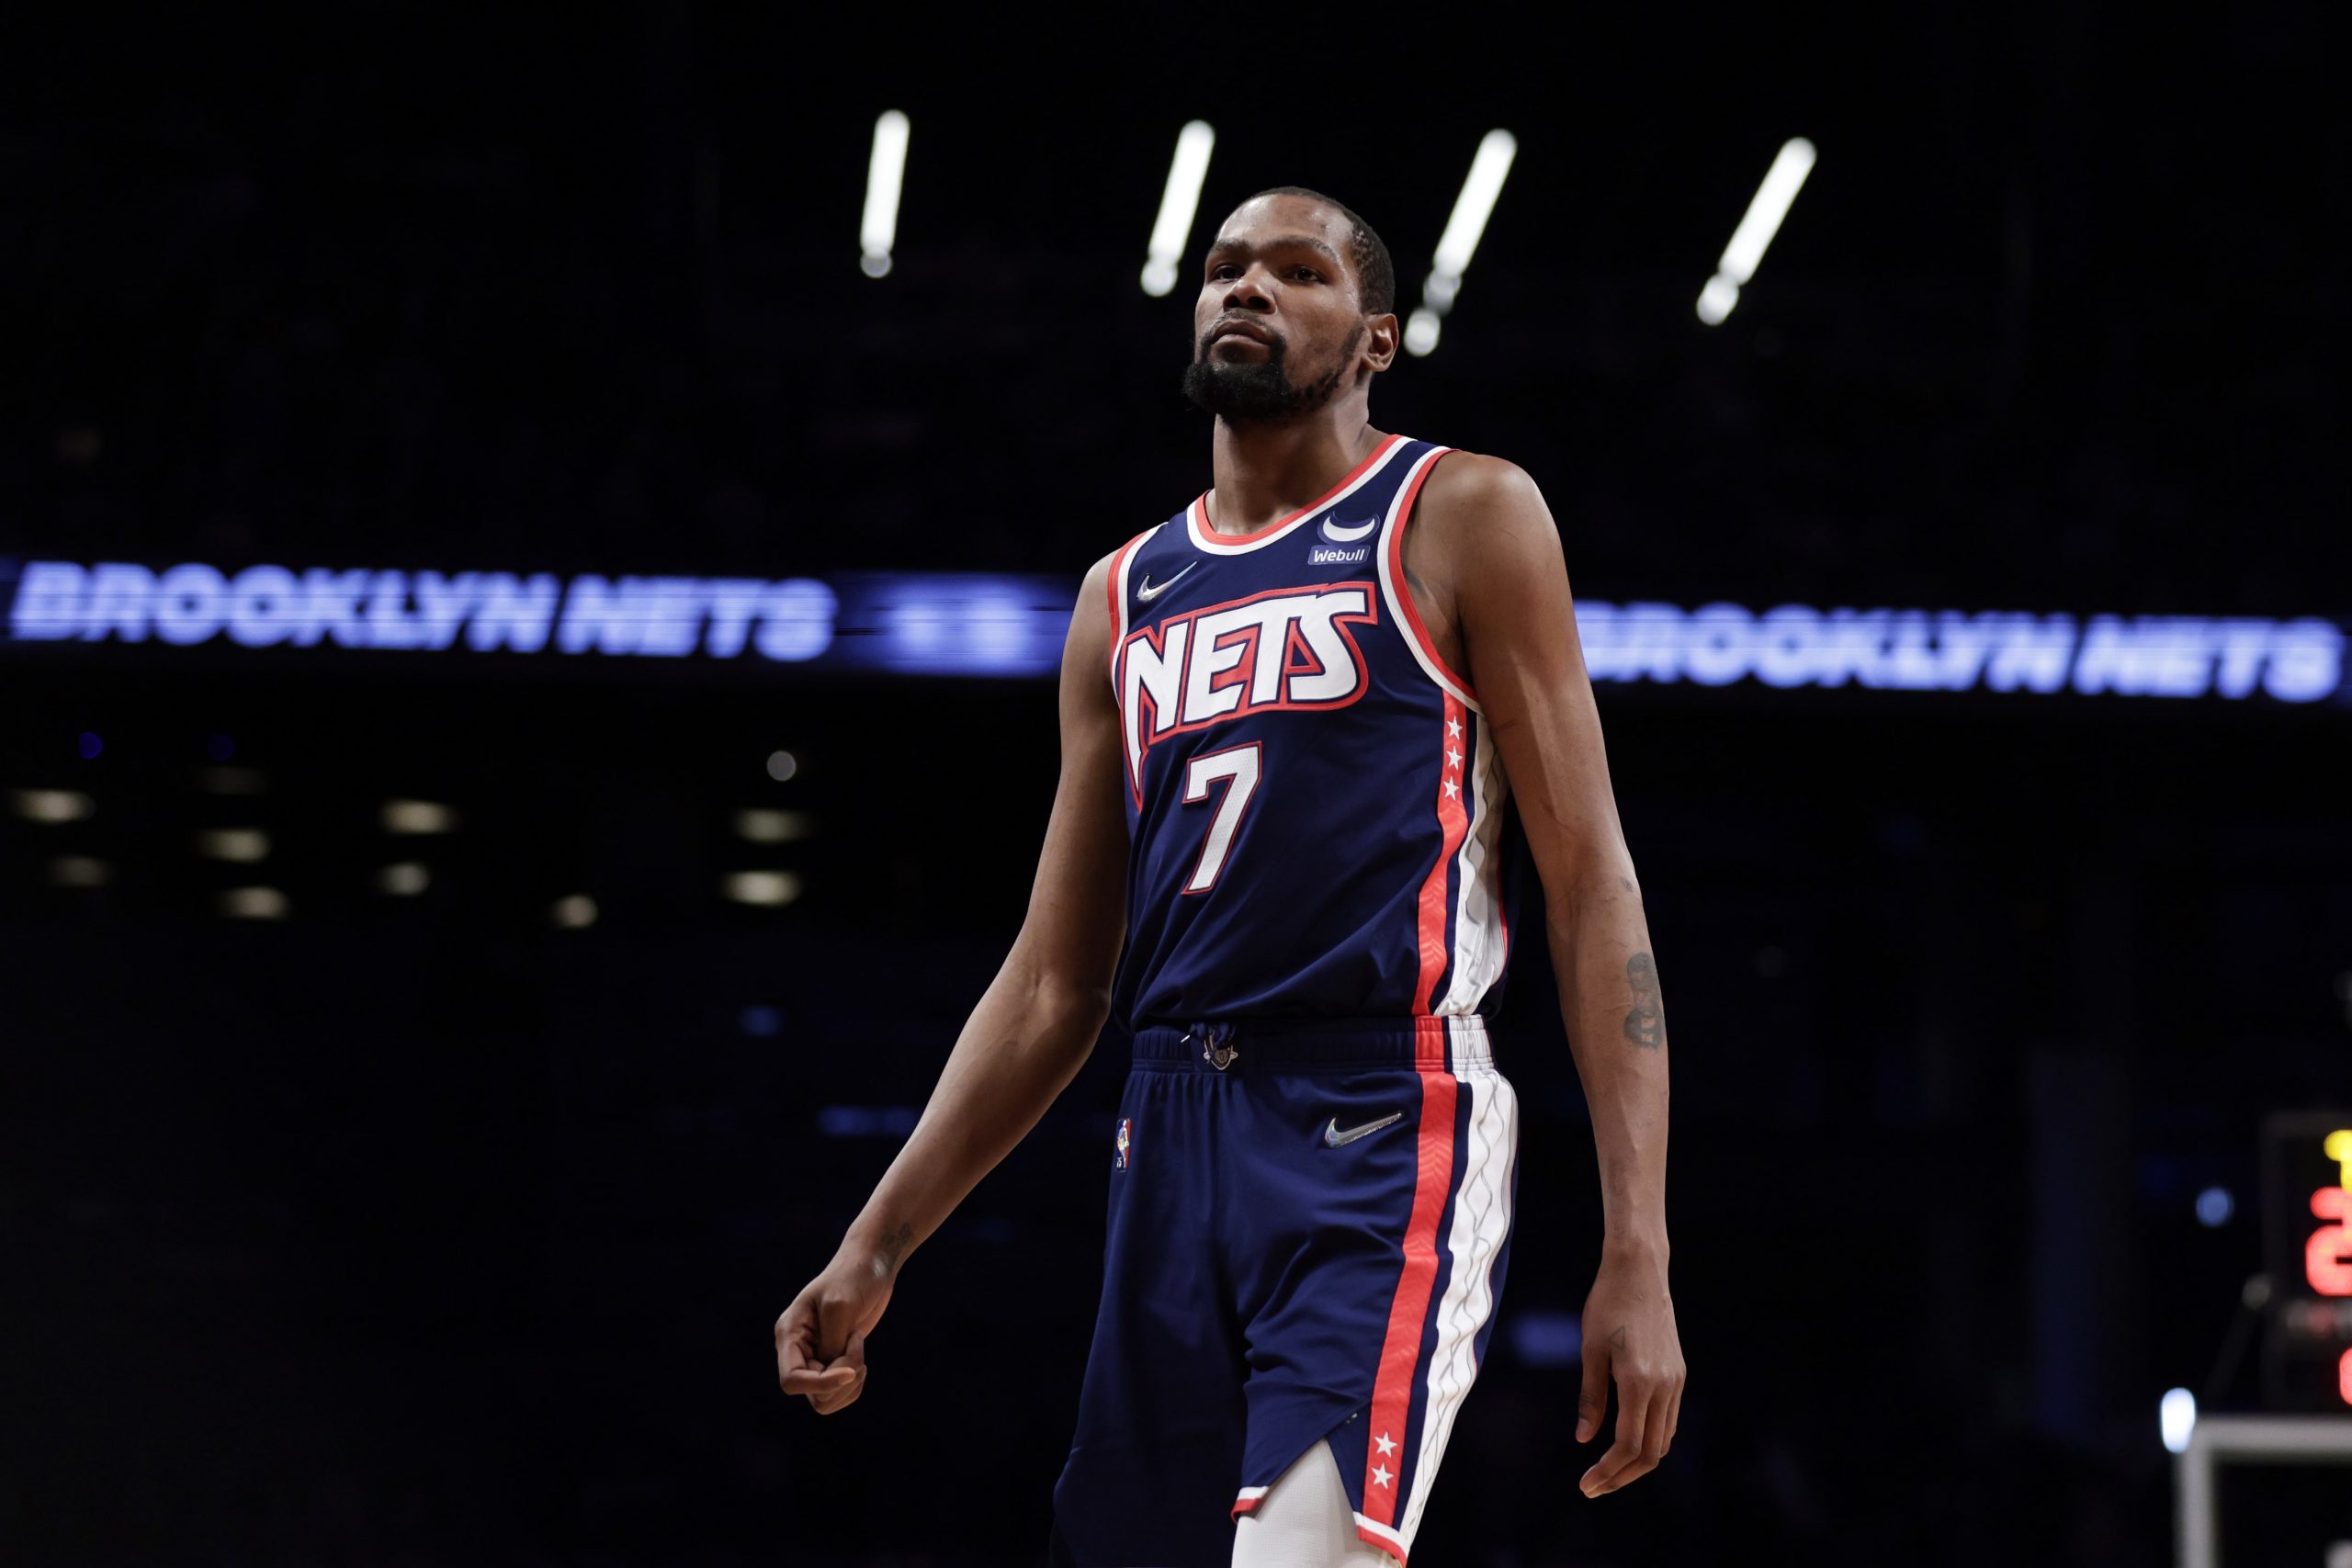 Brooklyn Nets forward Kevin Durant (7) walks on the court against the Milwaukee Bucks during the first half of an NBA basketball game Friday, Jan. 7, 2022, in New York